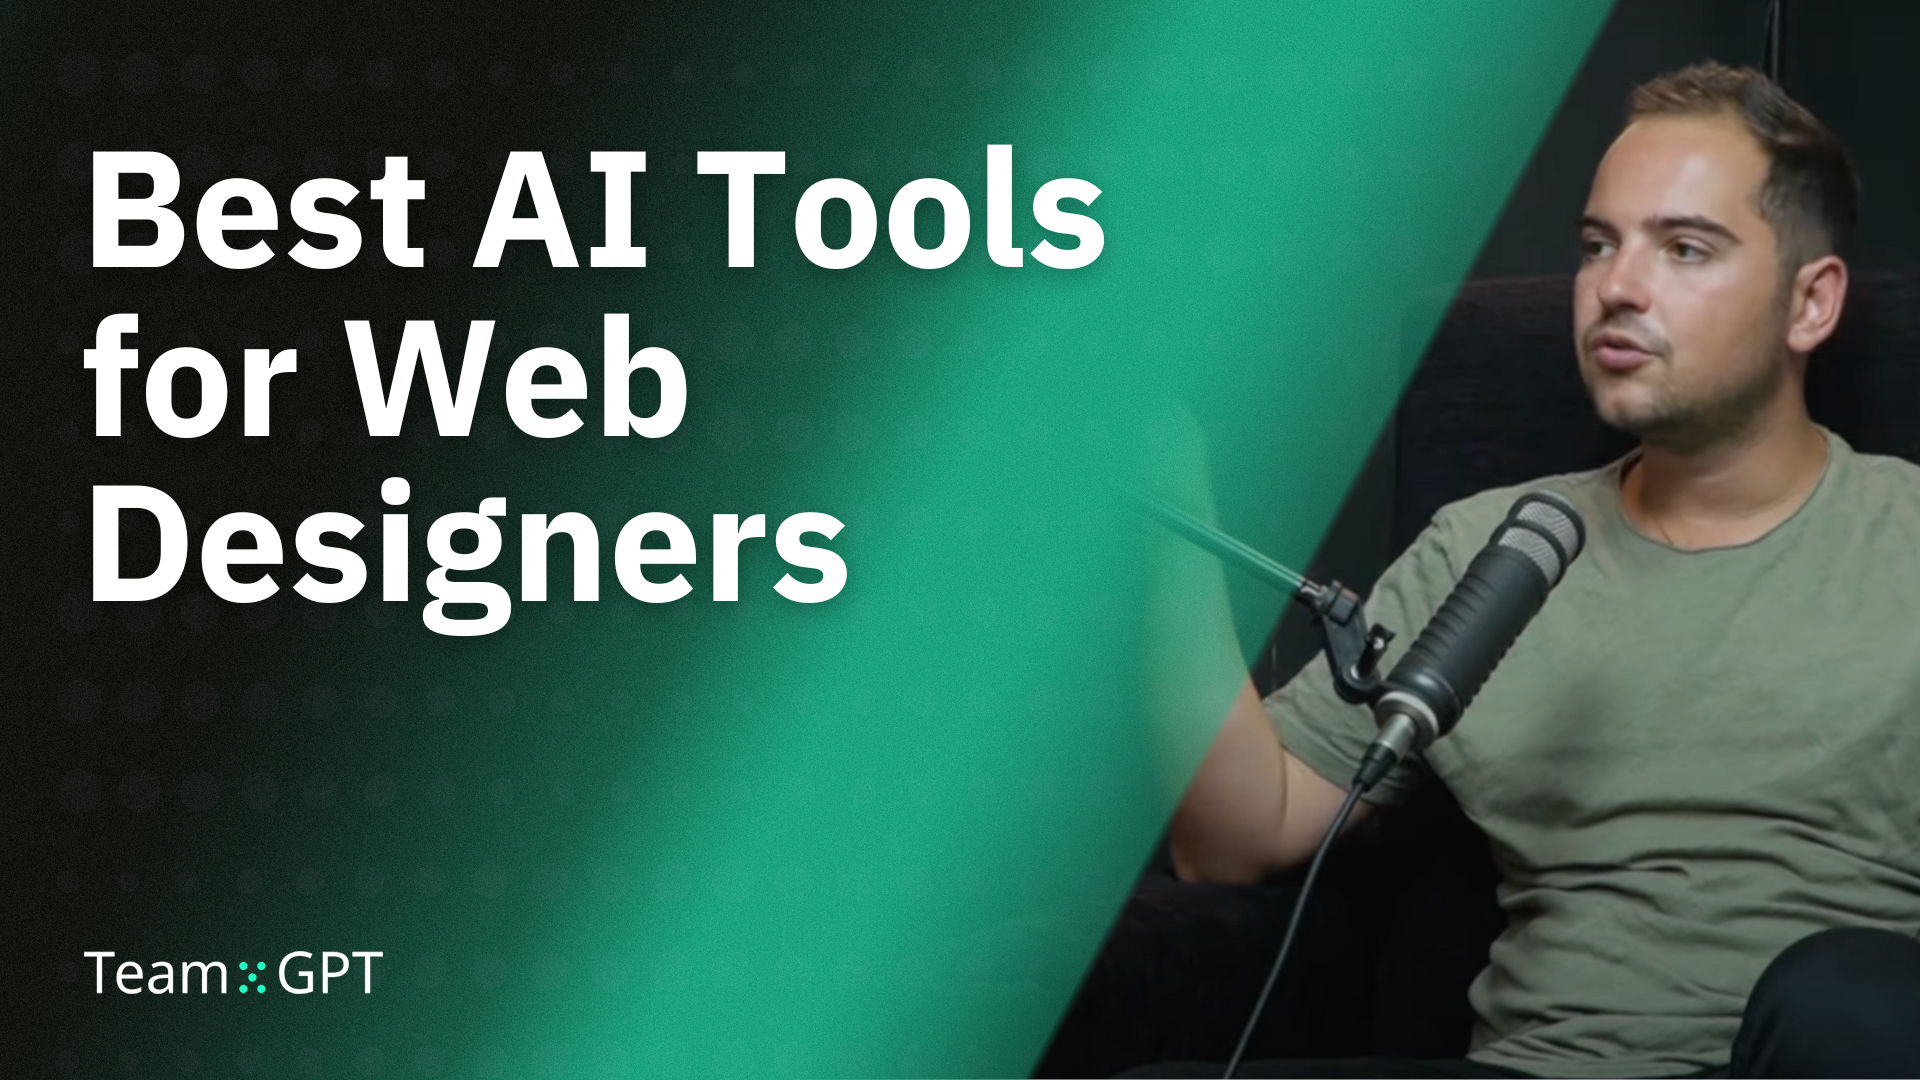 Iliya Valchanov talking about the best AI tools for web designers